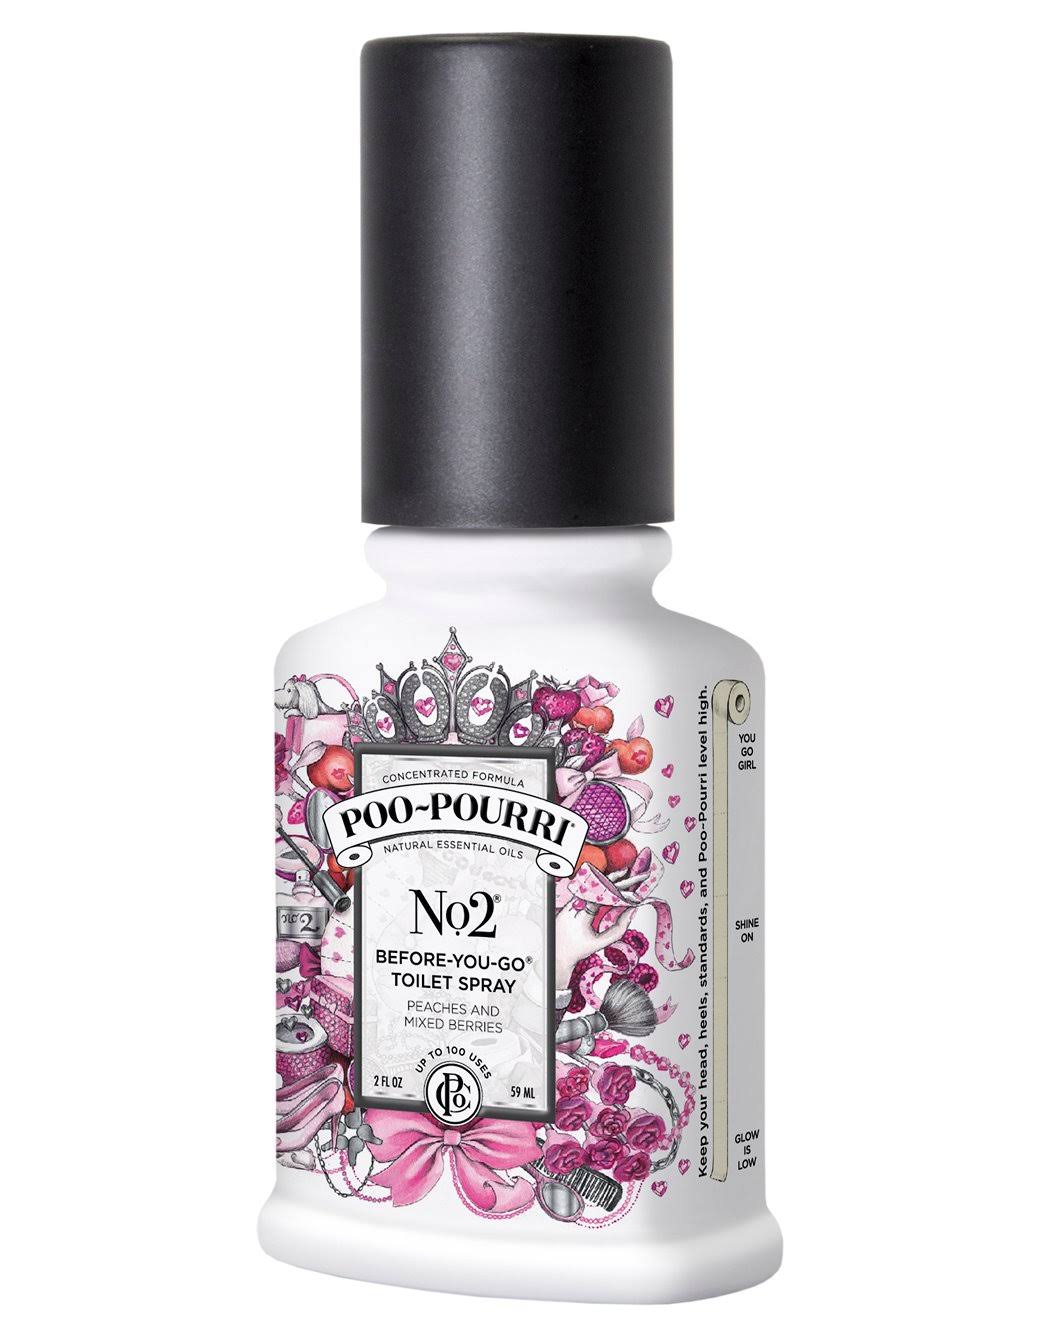 Poo-Pourri No. 2 Peach and Mixed Berry 2-Ounce Before-You-Go Toilet Spray